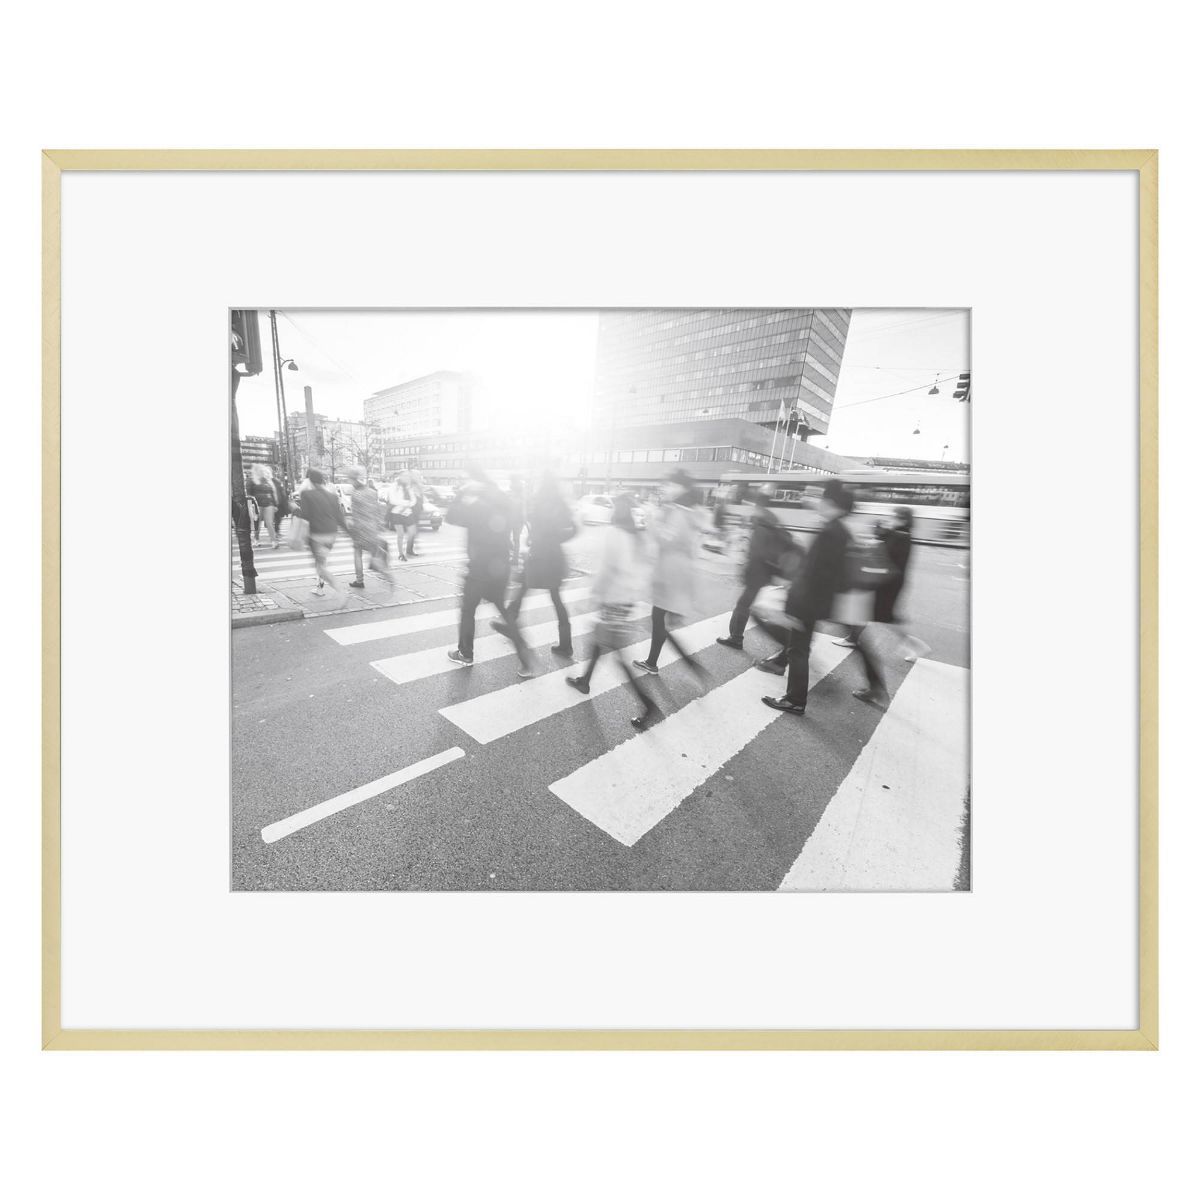 18.4" x 14.4" Matted to 8" x 10" Thin Metal Gallery Frame Brass - Project 62™ | Target